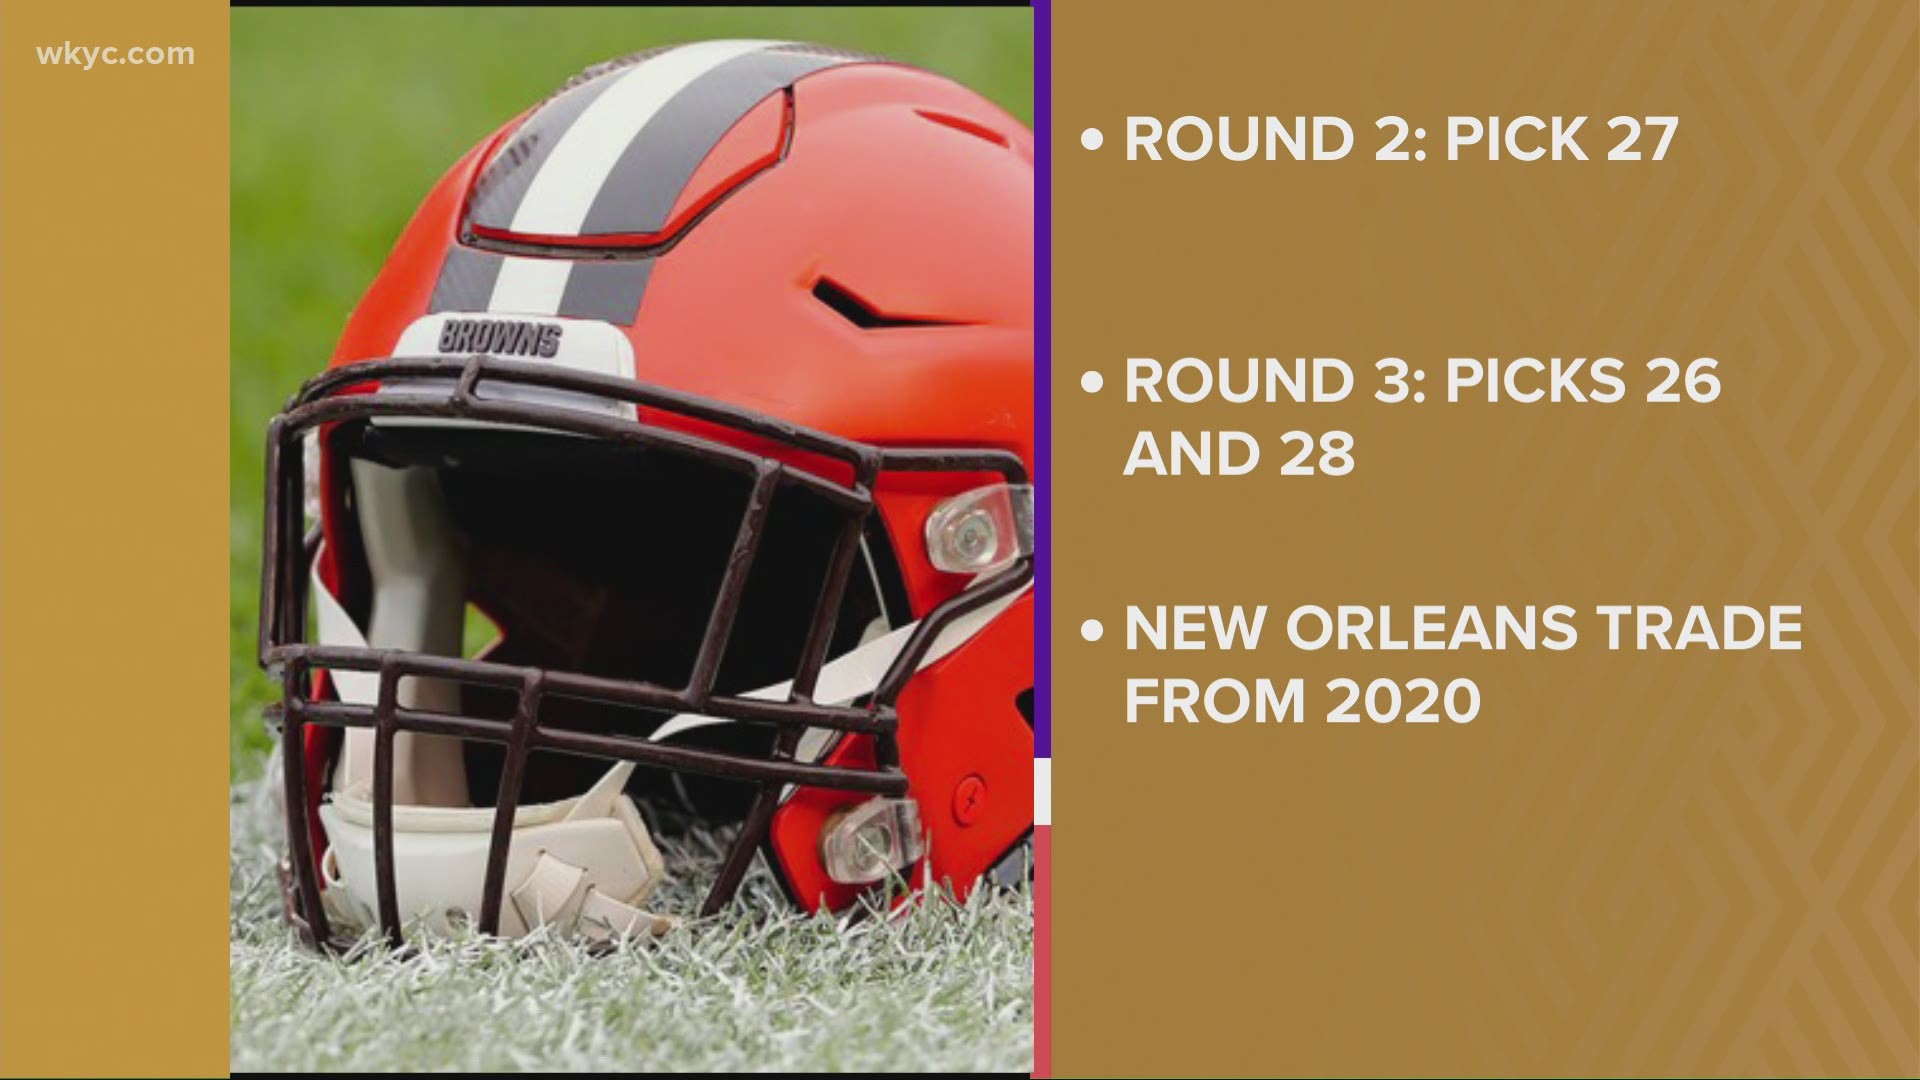 The Cleveland Browns have one pick in Round 2 with No. 27. For Round 3, they have picks 26 and 28.